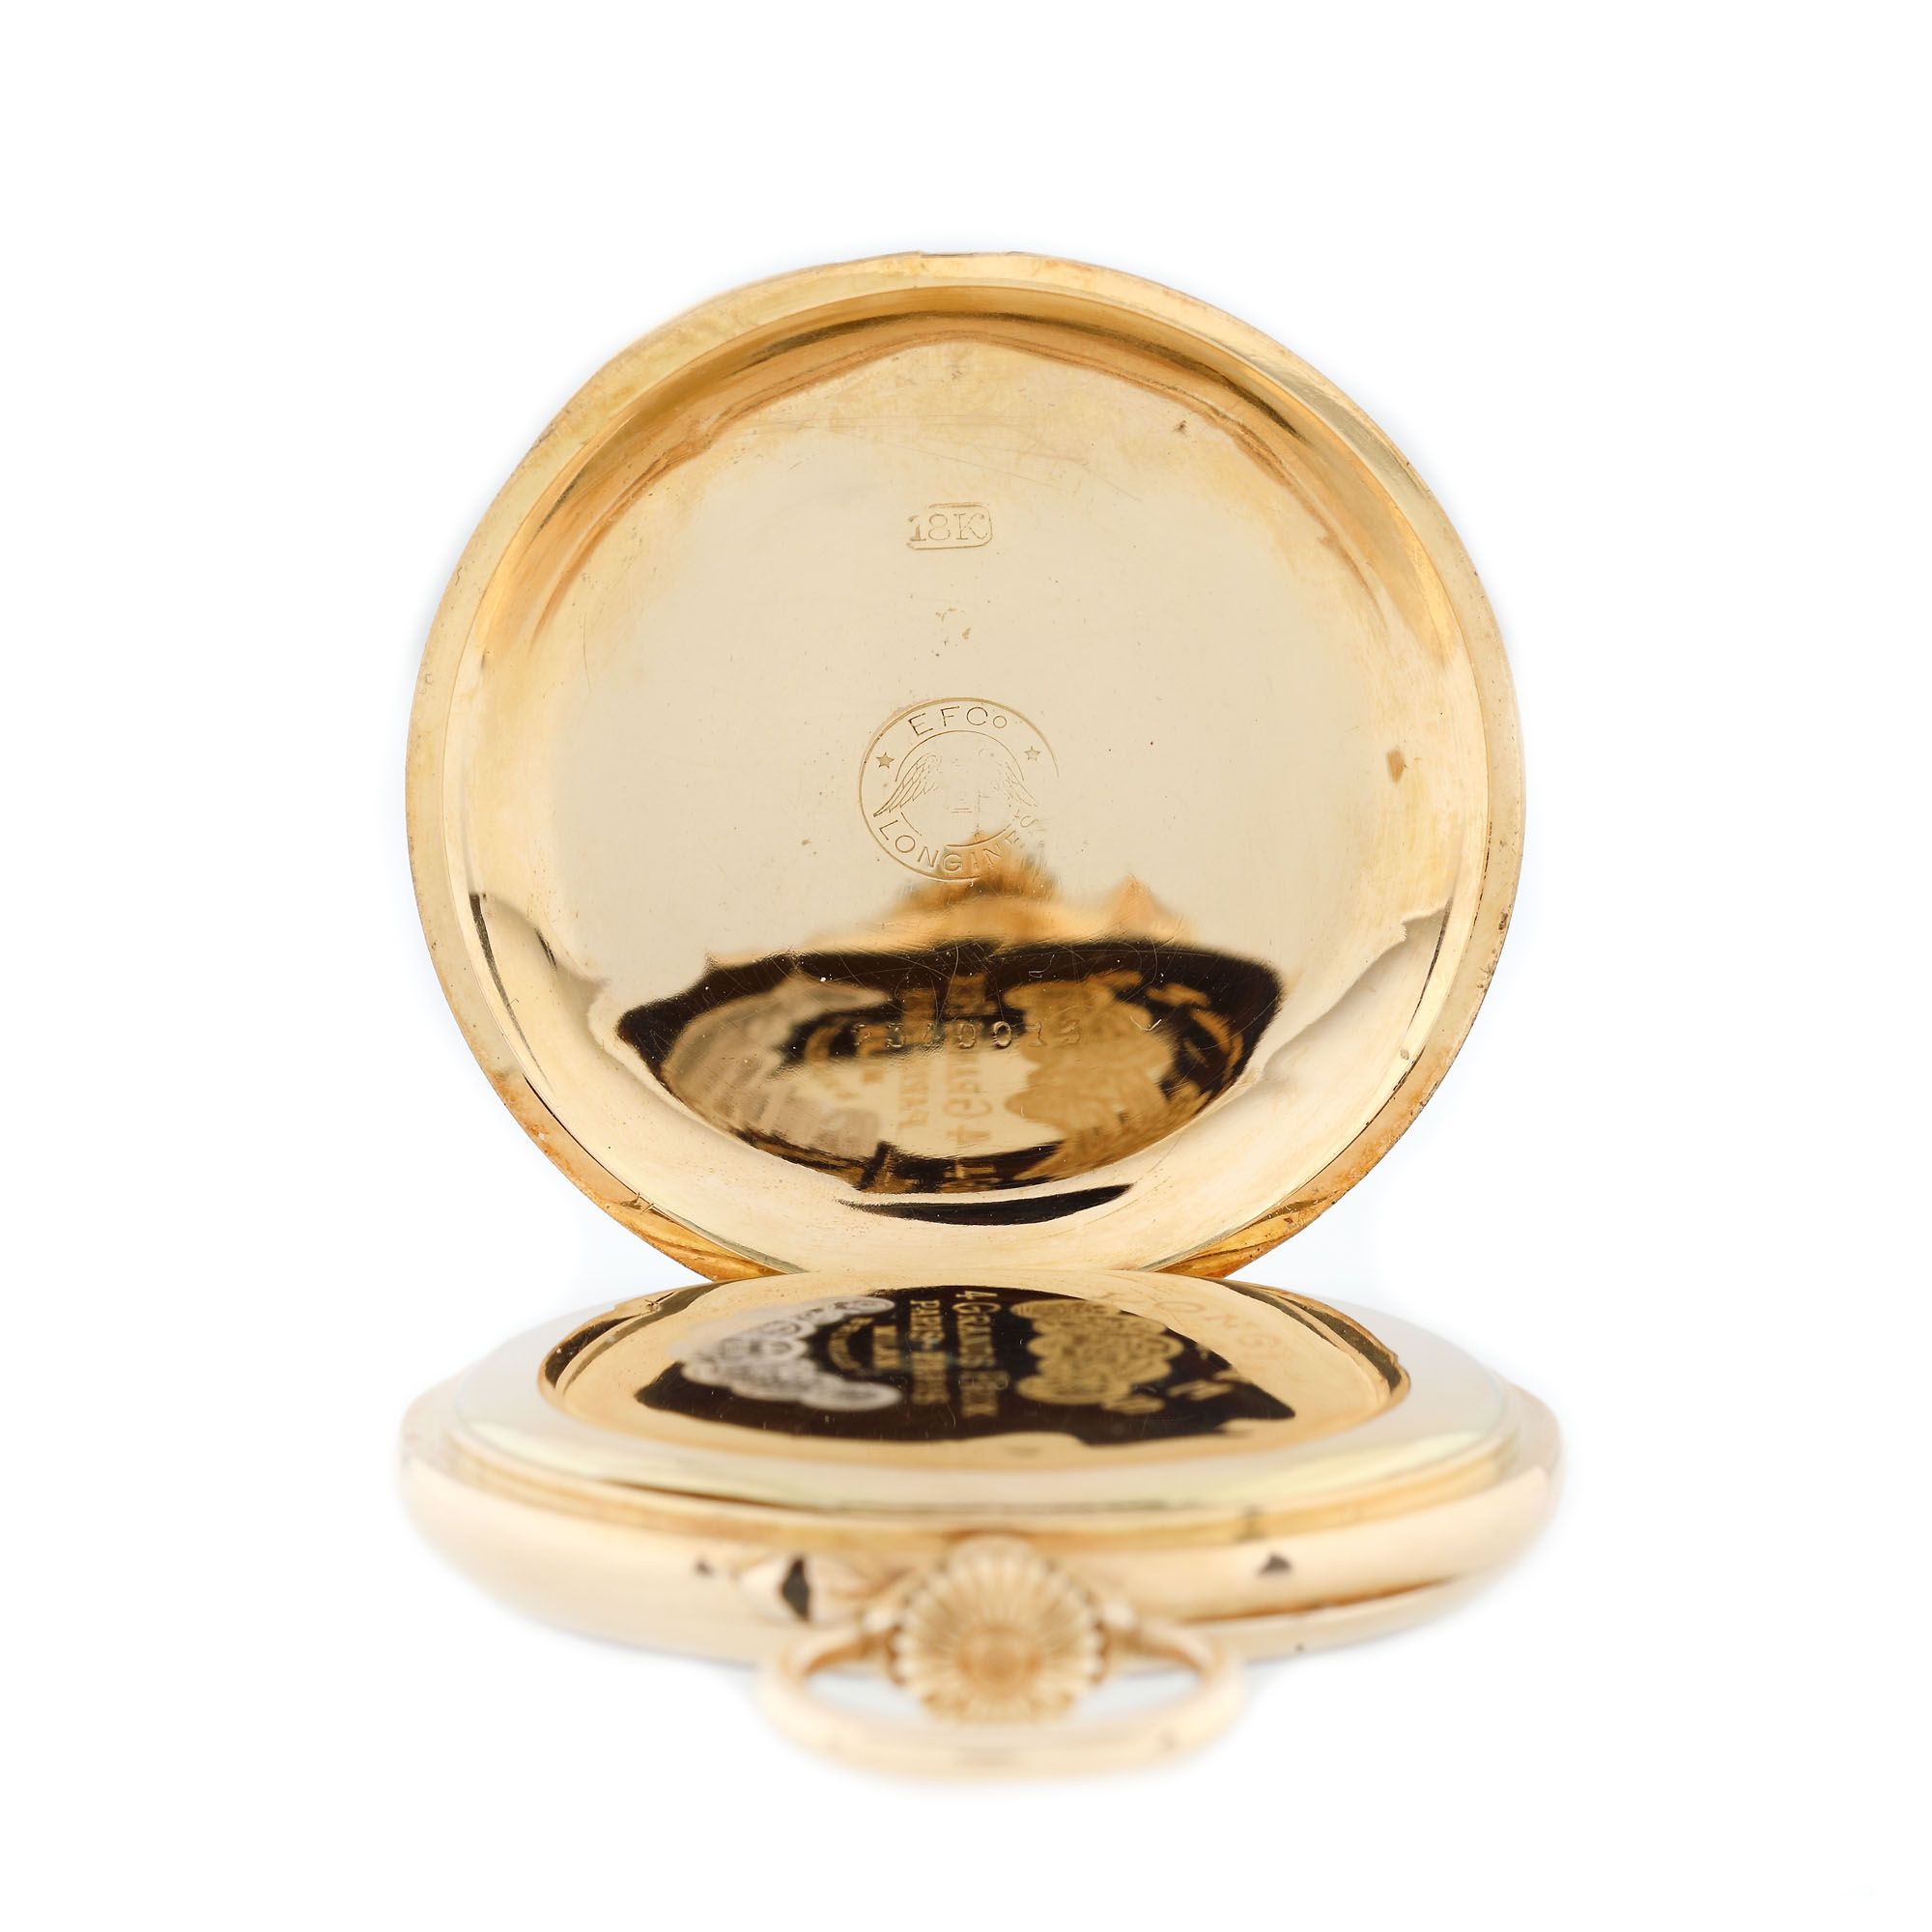 Longines pocket watch, gold, belonged to a prince Ghica - Image 3 of 5